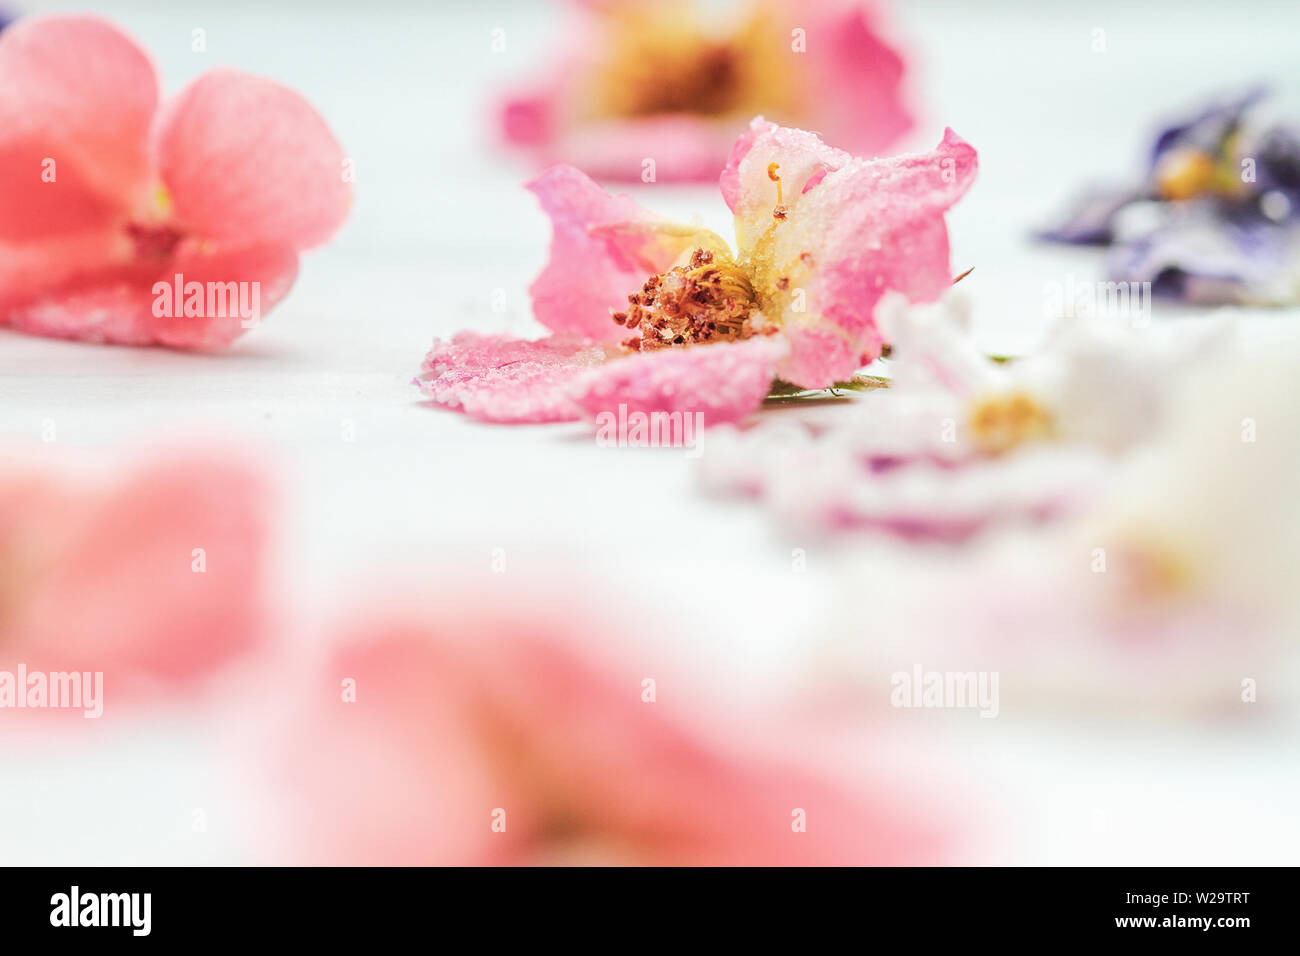 Homemade sugared or crystallized edible flowers on a white wooden rustic table. Selective focus on rose in center with blurred foreground and backgrou Stock Photo